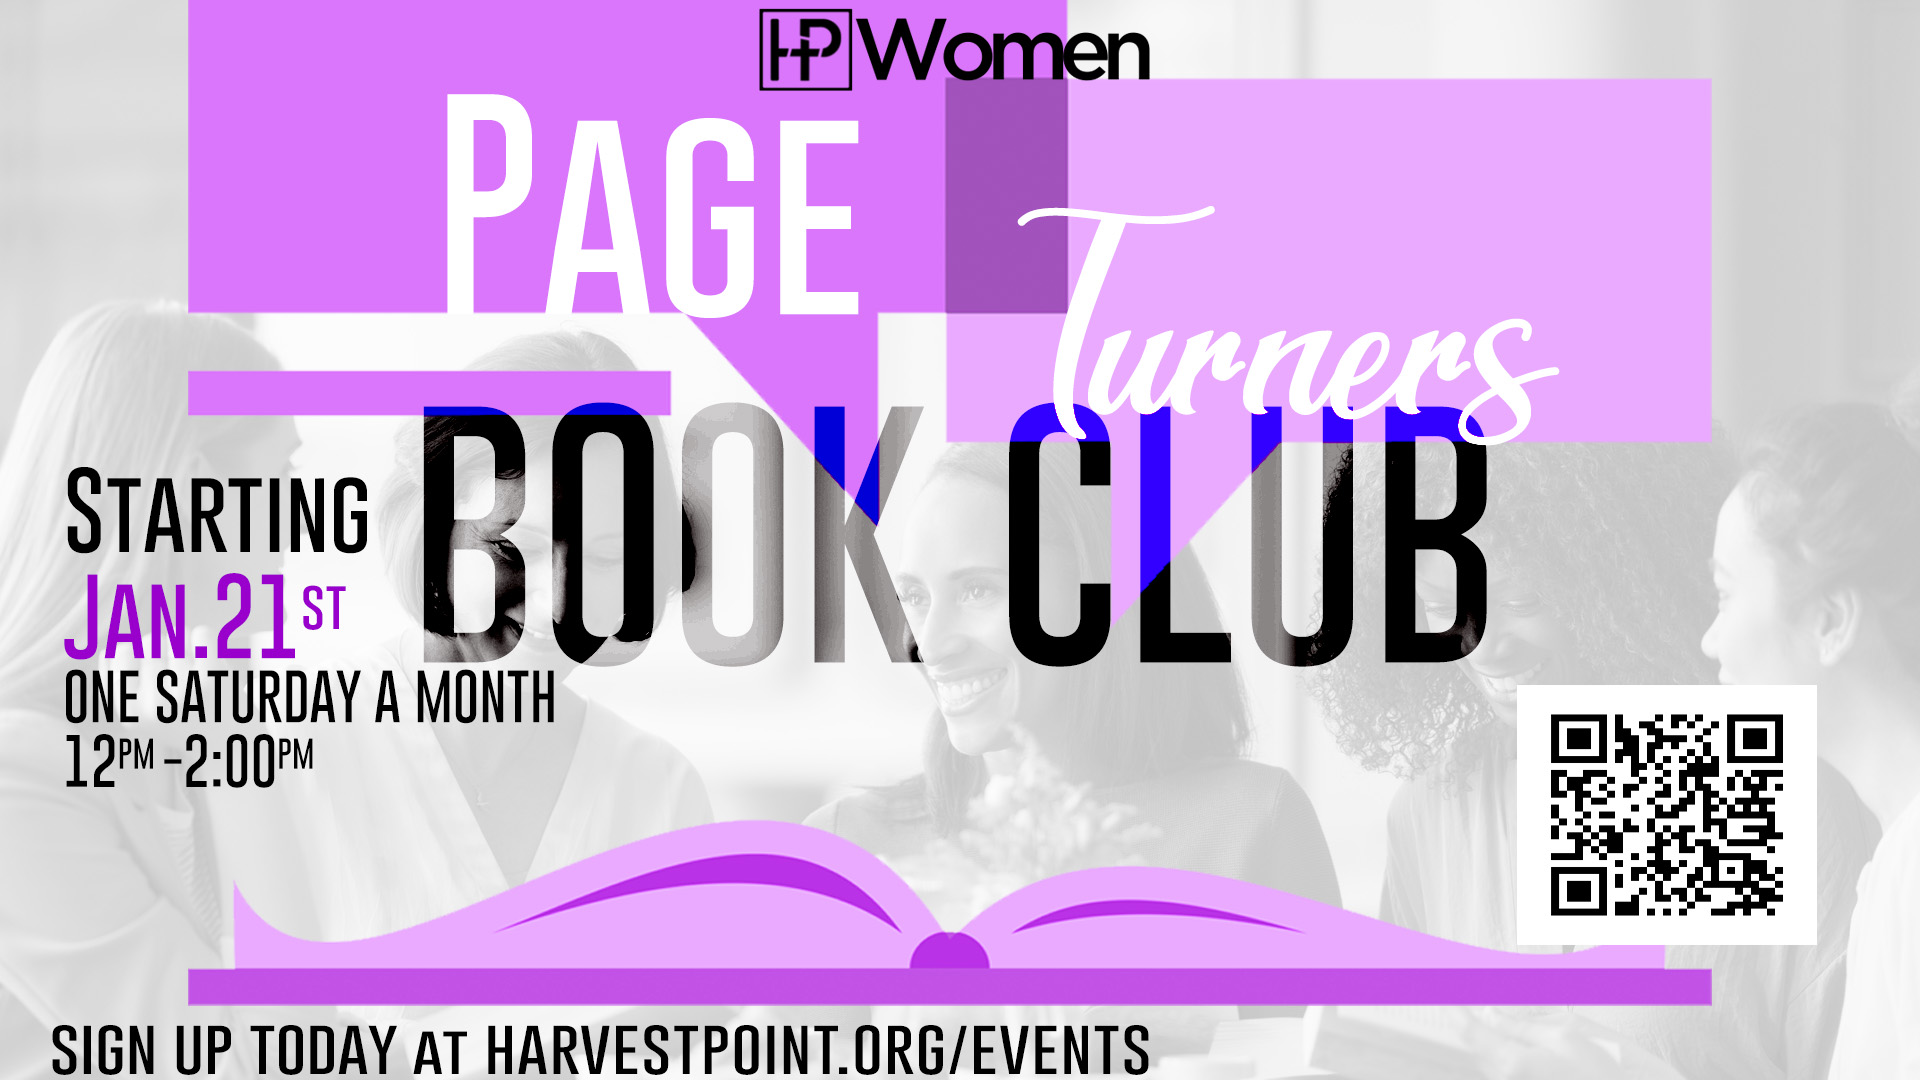 Women’s Page Turners Book Club